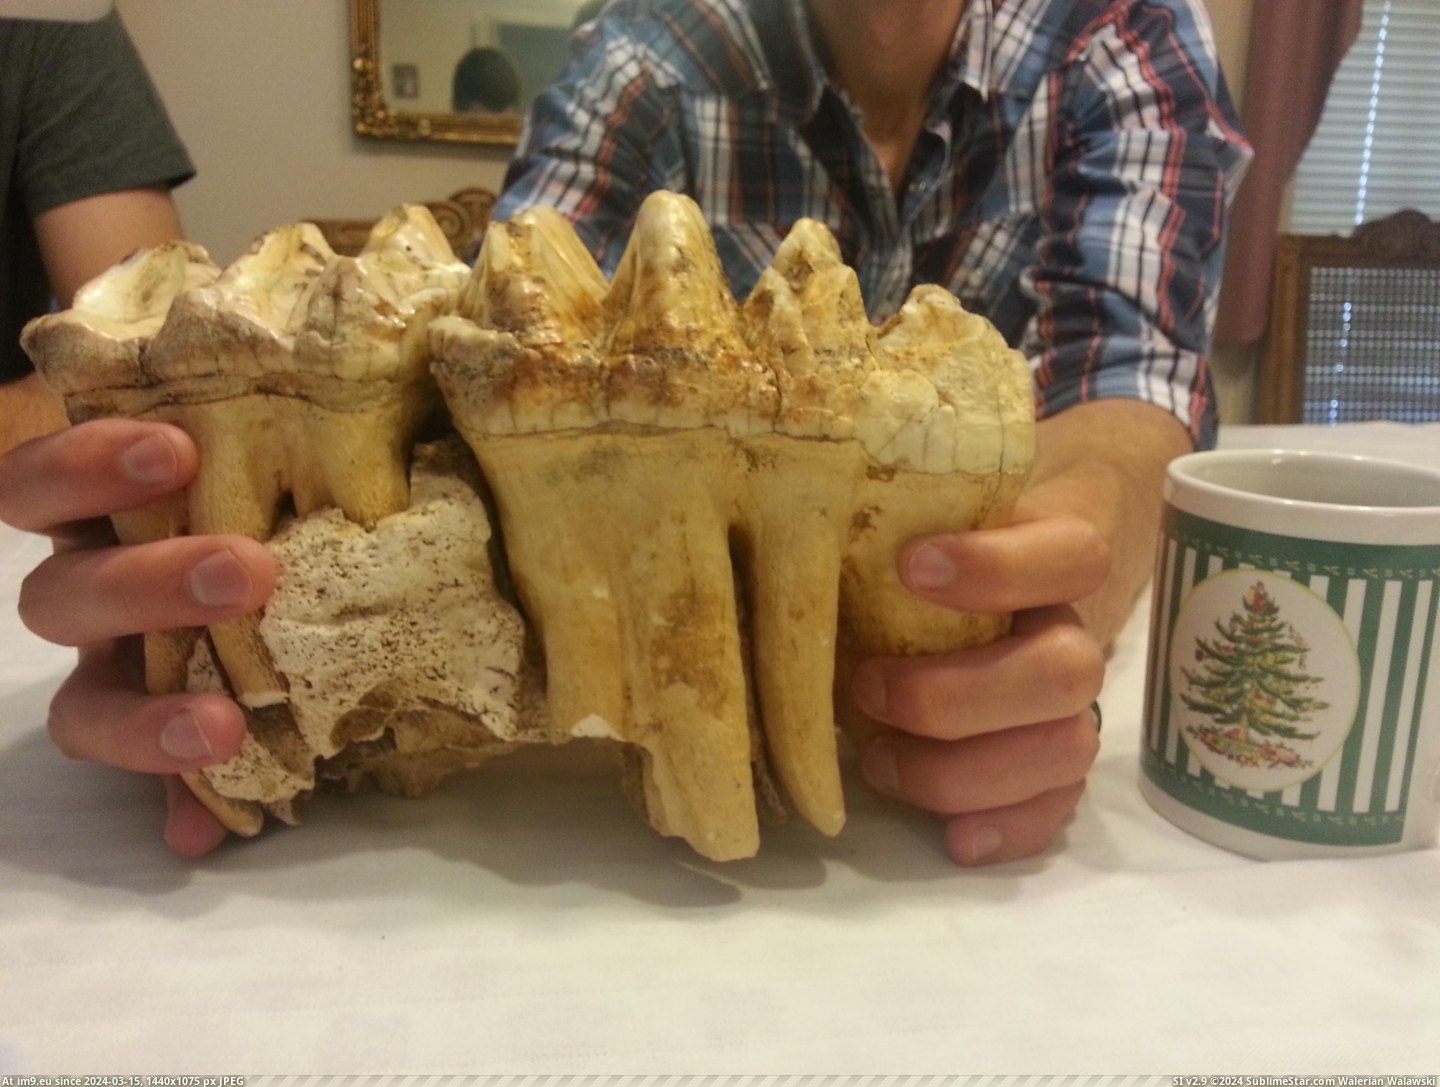 #Scale #Coffee #Cup #Cave #Teeth #Arkansas #Mastodon #Northern #Grandpa #Pair [Pics] In 1964 my grandpa found a pair of mastodon teeth in a cave in northern Arkansas- the coffee cup is for scale. Pic. (Изображение из альбом My r/PICS favs))